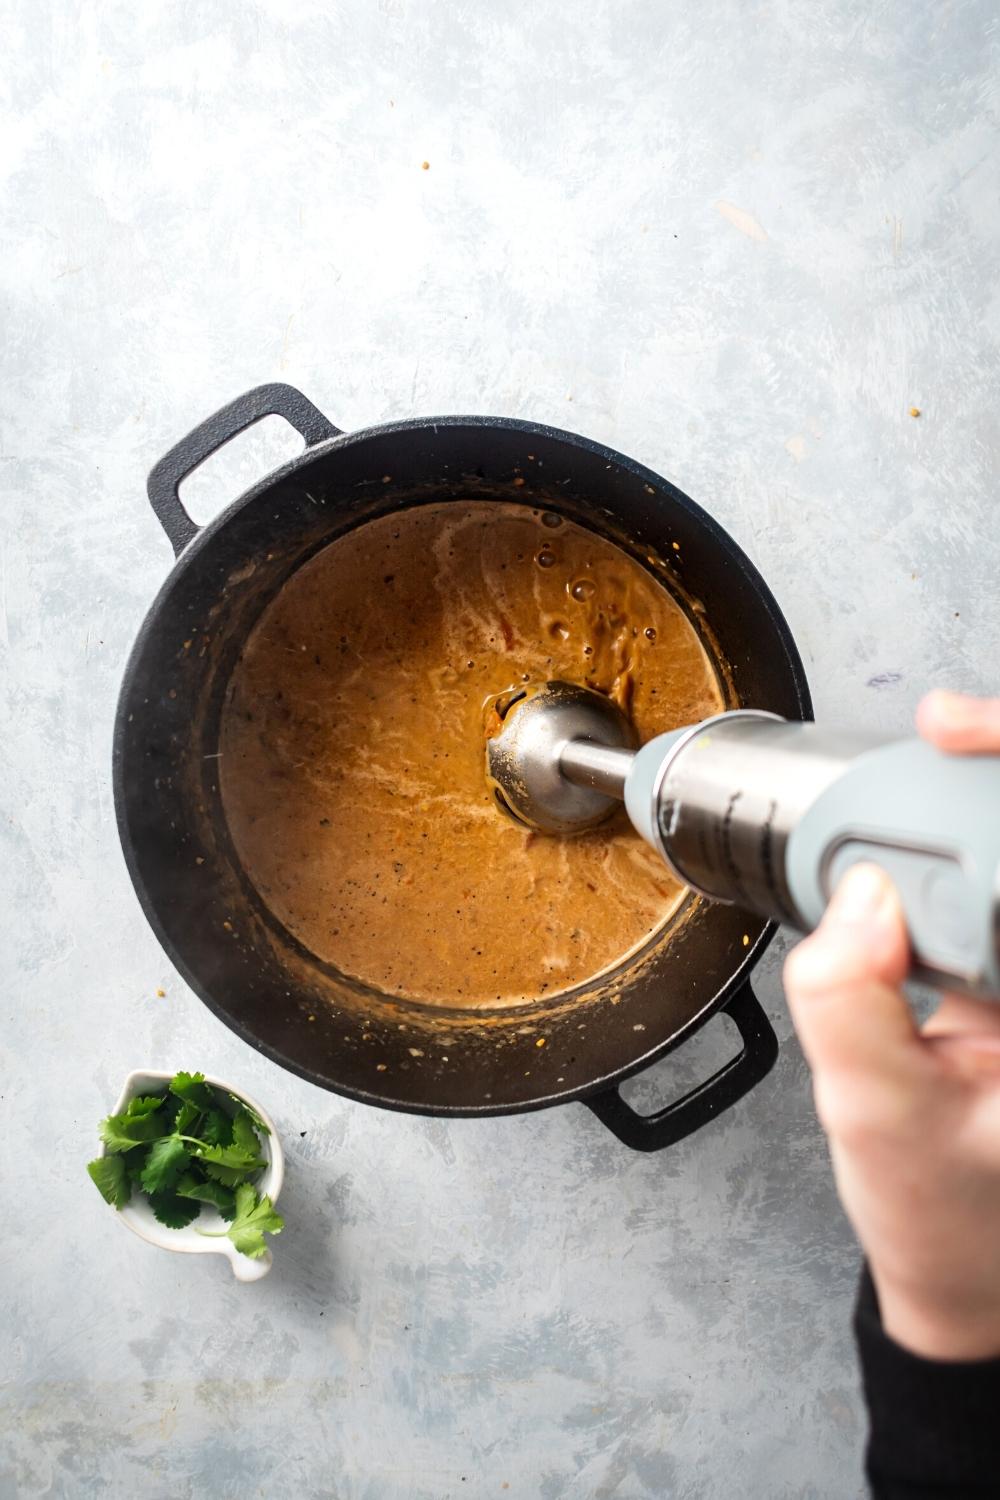 A hand holding an immersion blender in a Dutch oven filled with consomme ingredients.